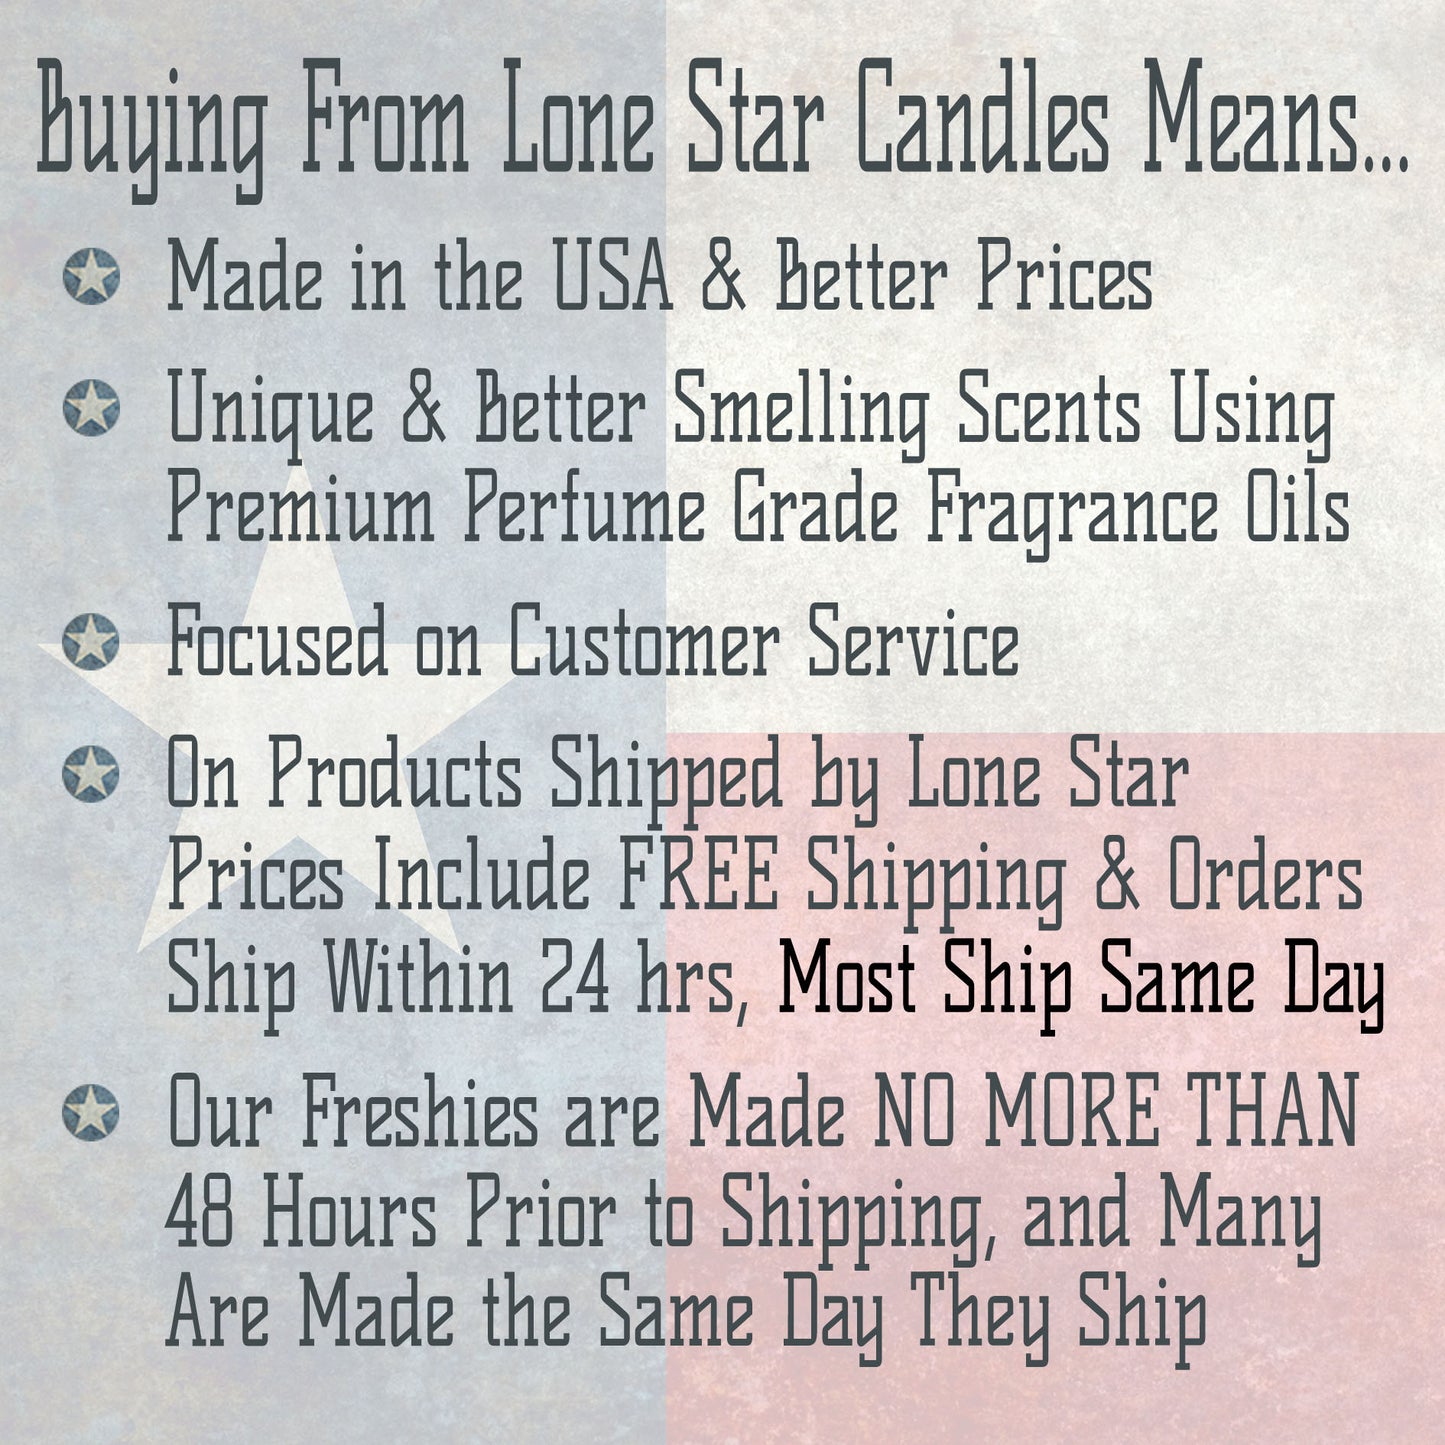 Cranberries & Sandalwood, Lone Star Candles & More's Premium Strongly Scented Freshies, A Delightful Mix of Spiced Cranberry, & Sandalwood, Car & Air Freshener, USA Made in Texas, Pig 1-Pack